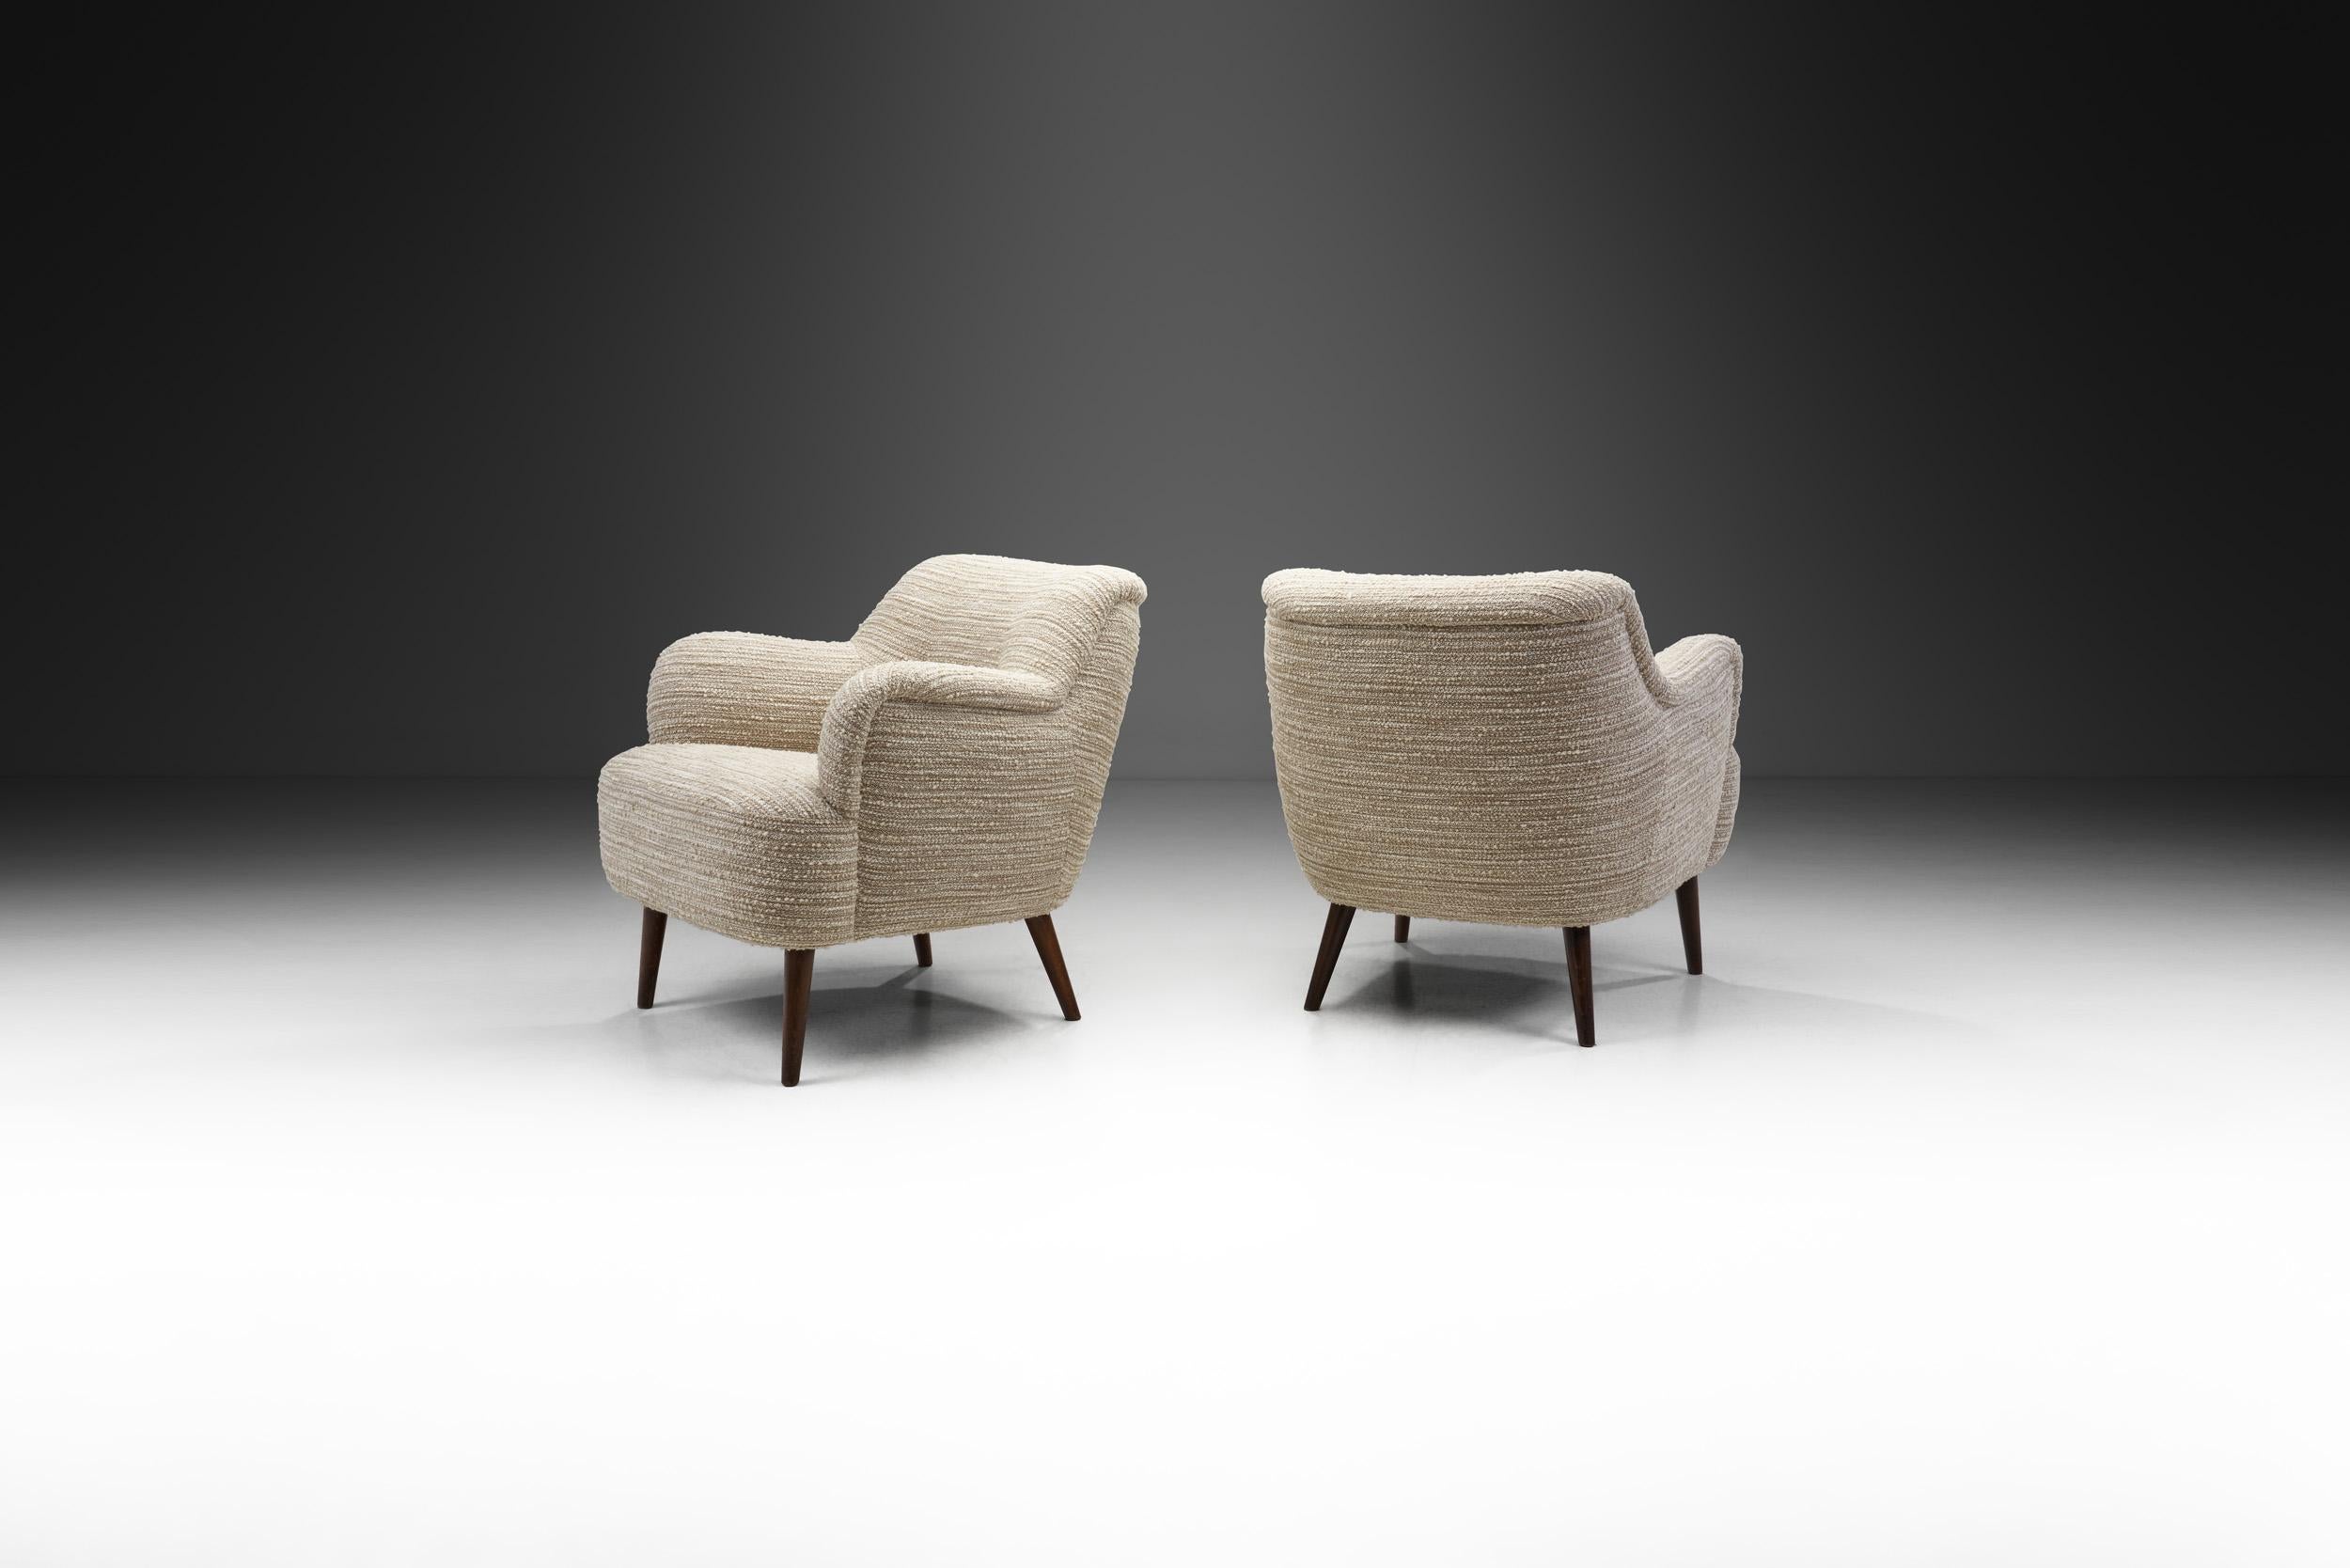 Mid-20th Century European Mid-Century Modern Armchairs in Bouclé, Europe, ca 1950s For Sale